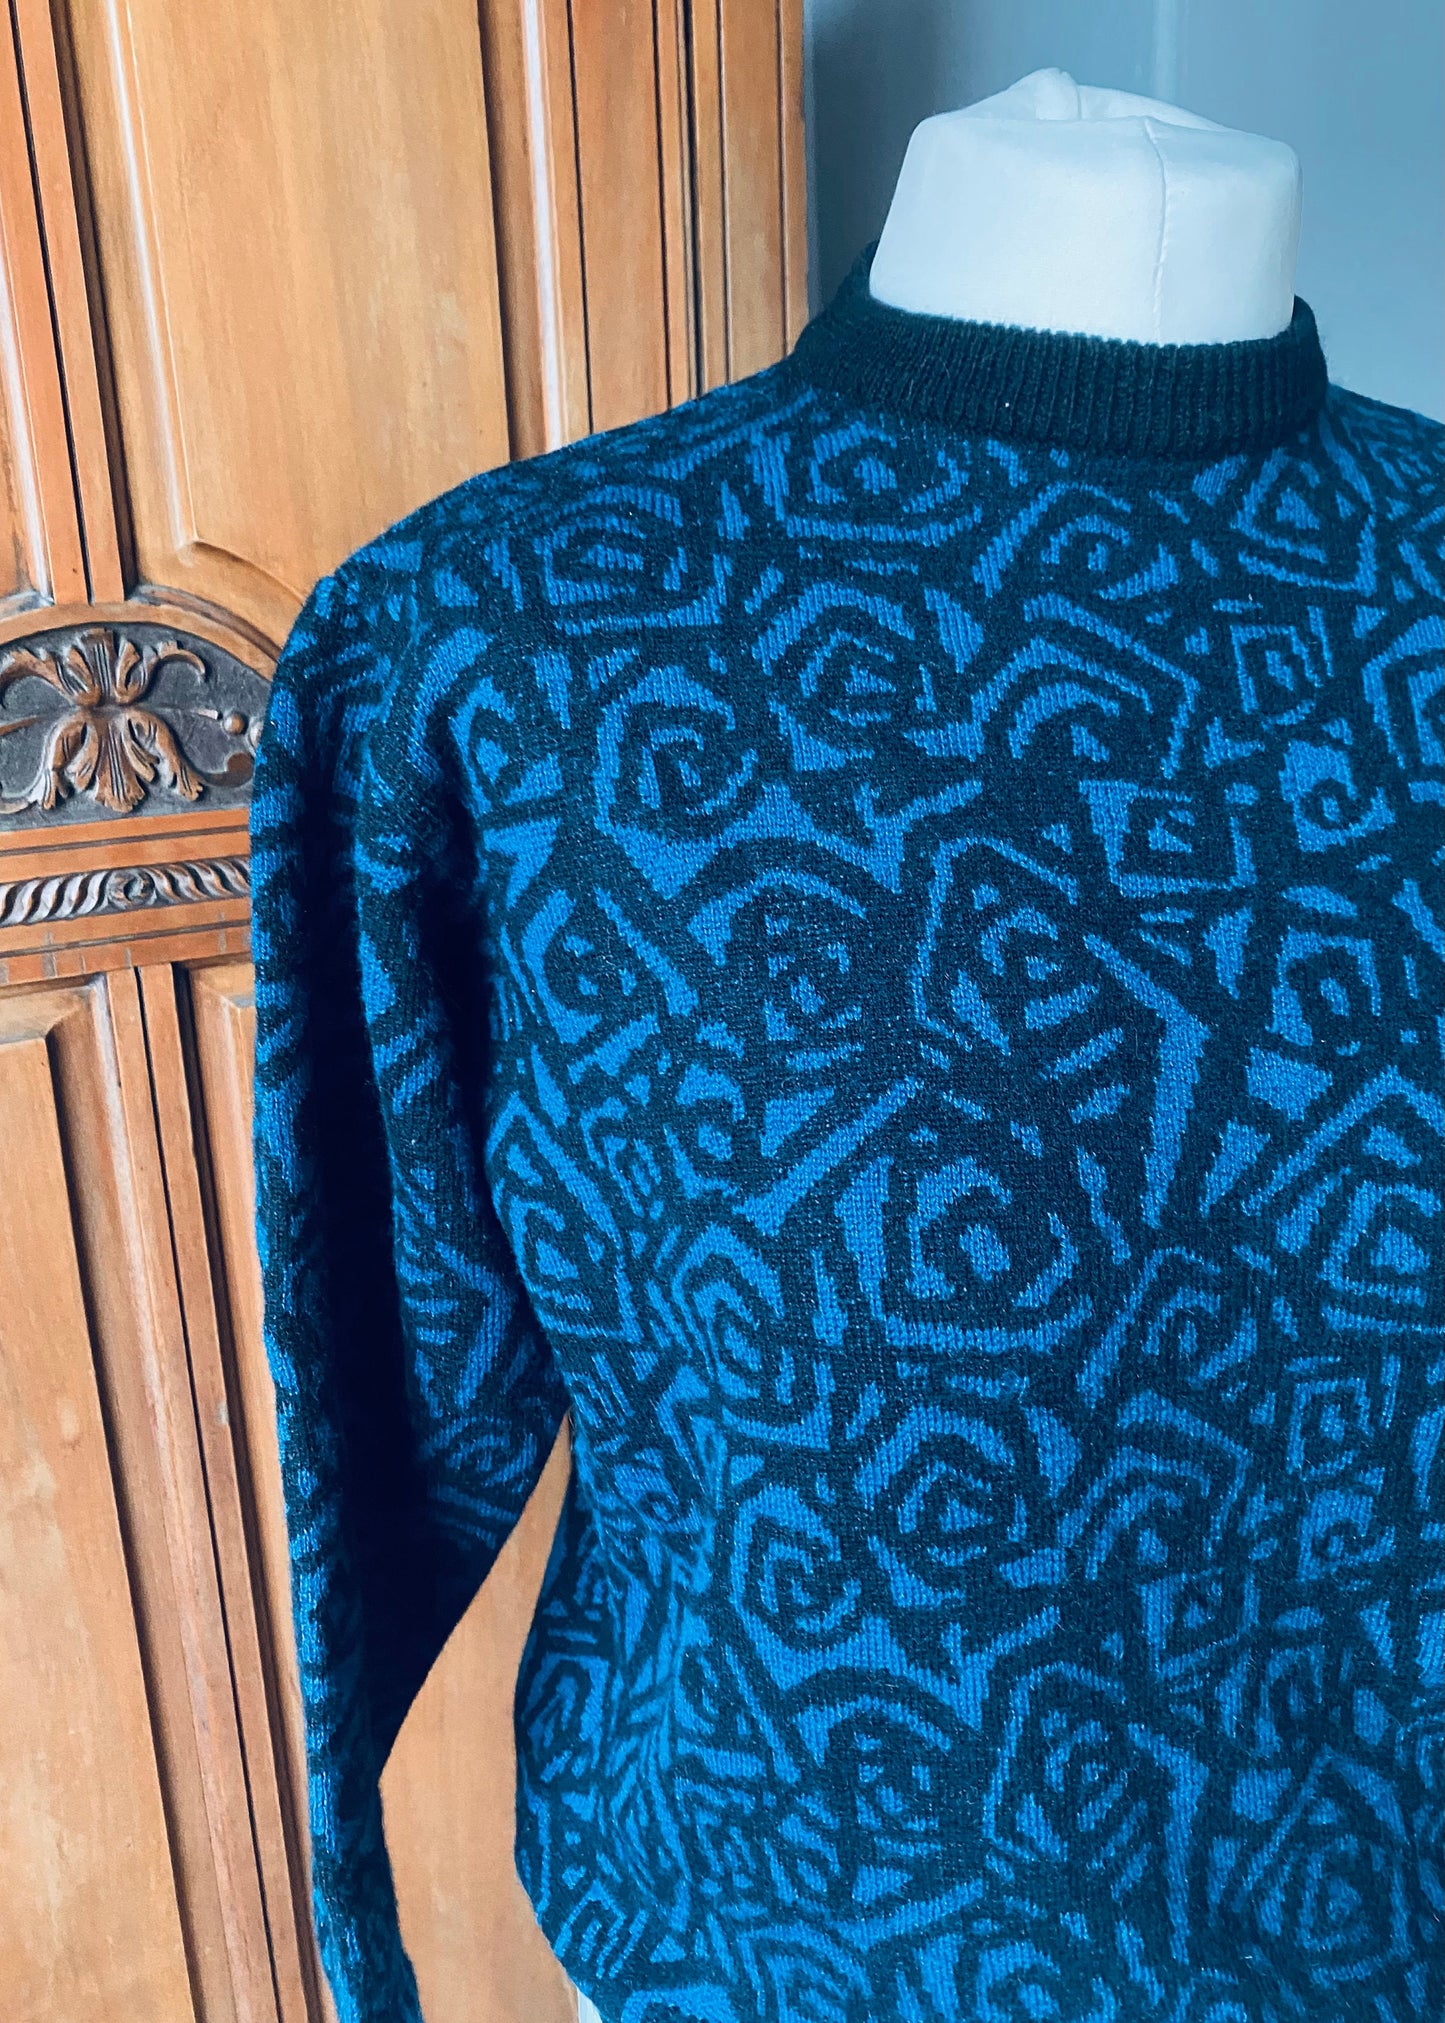 80s blue and black graphic print crew neck jumper. Approx UK size 10-14